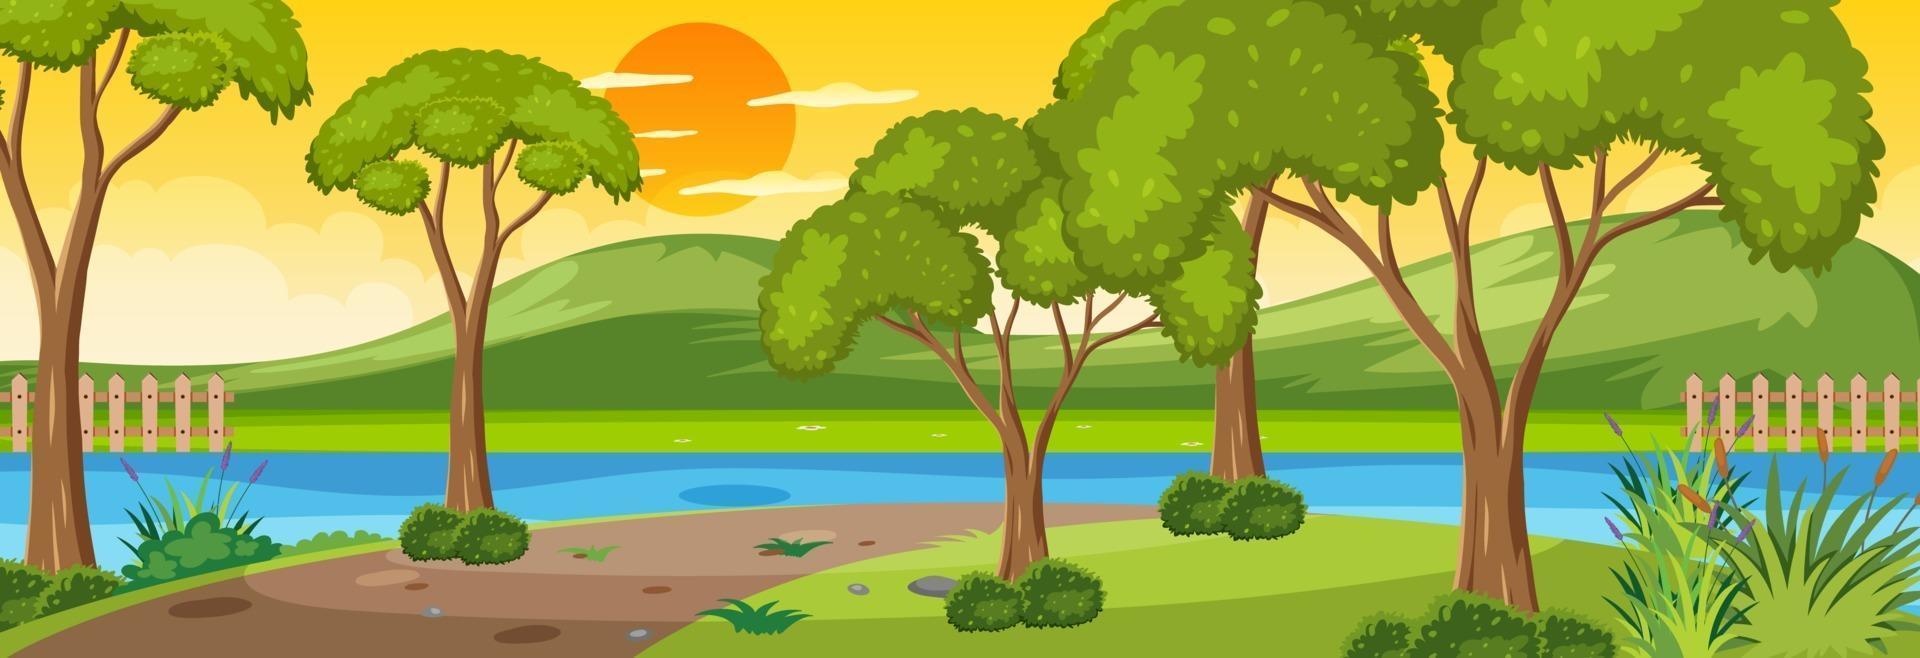 Forest along the river horizontal scene at sunset time with many trees vector